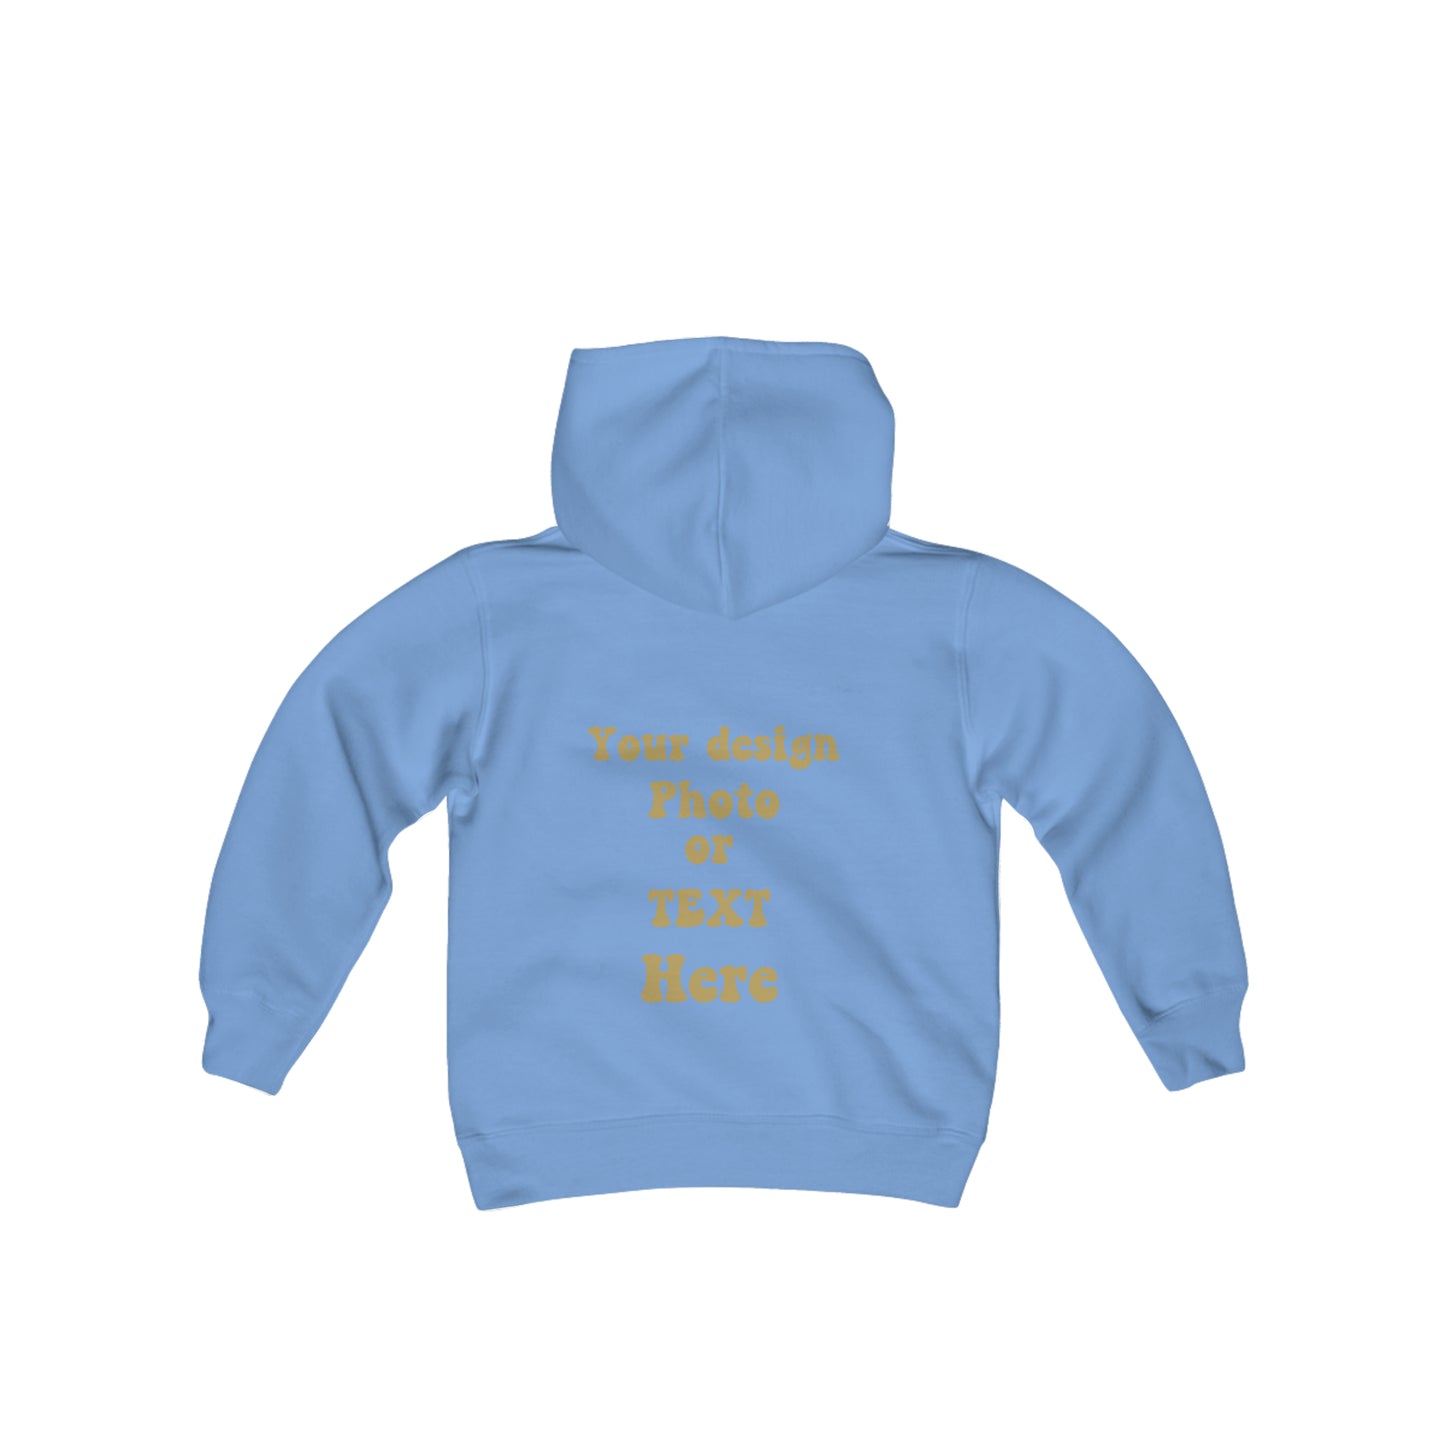 Youth Heavy Blend Hooded Sweatshirt - Personalize It with Text and Photo Kids clothes   